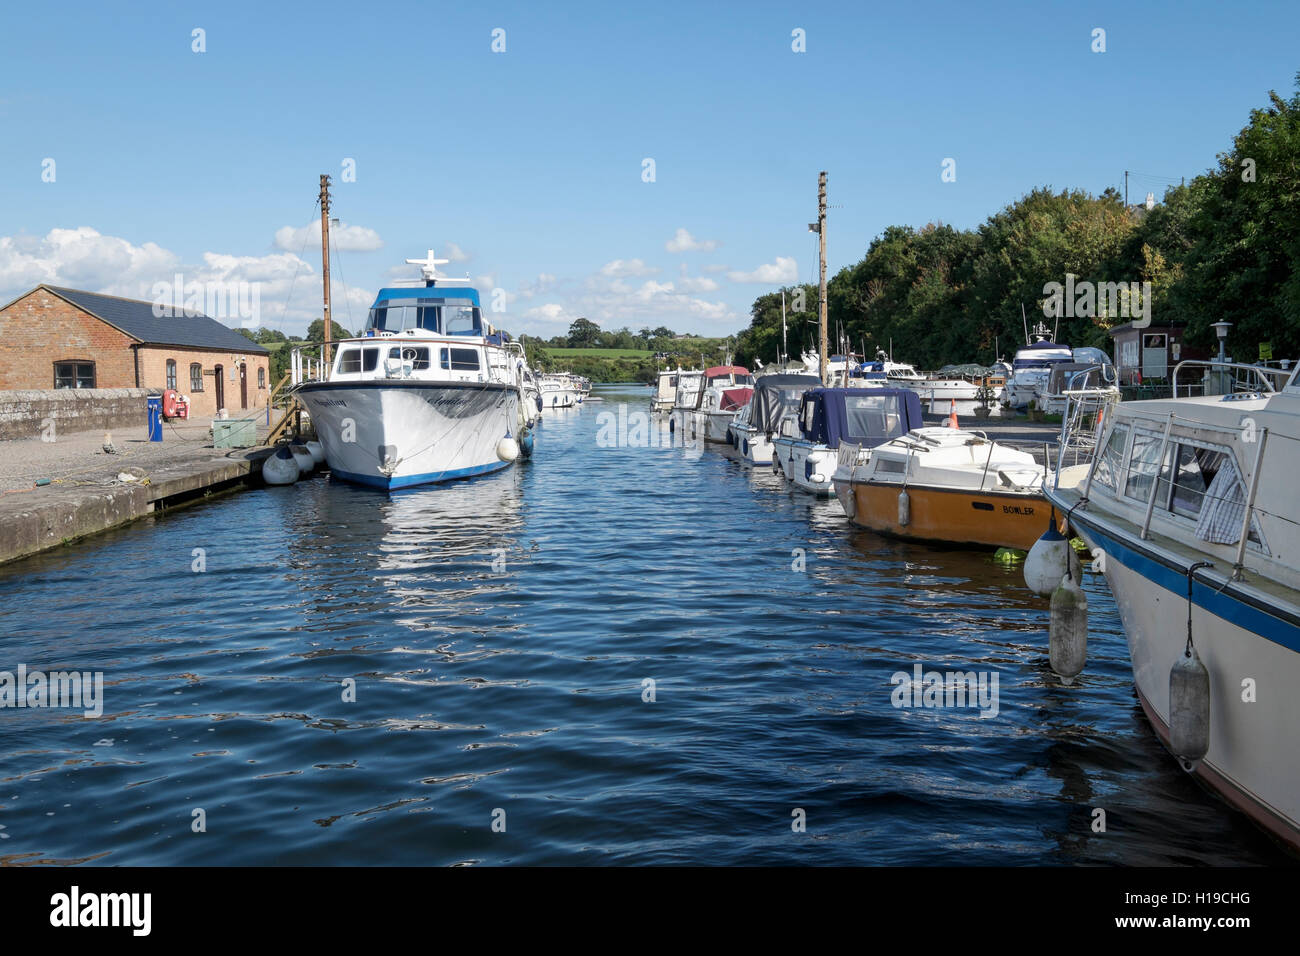 Cabin cruisers moored at Sharpness on the Gloucester and Sharpness canal, England UK Stock Photo